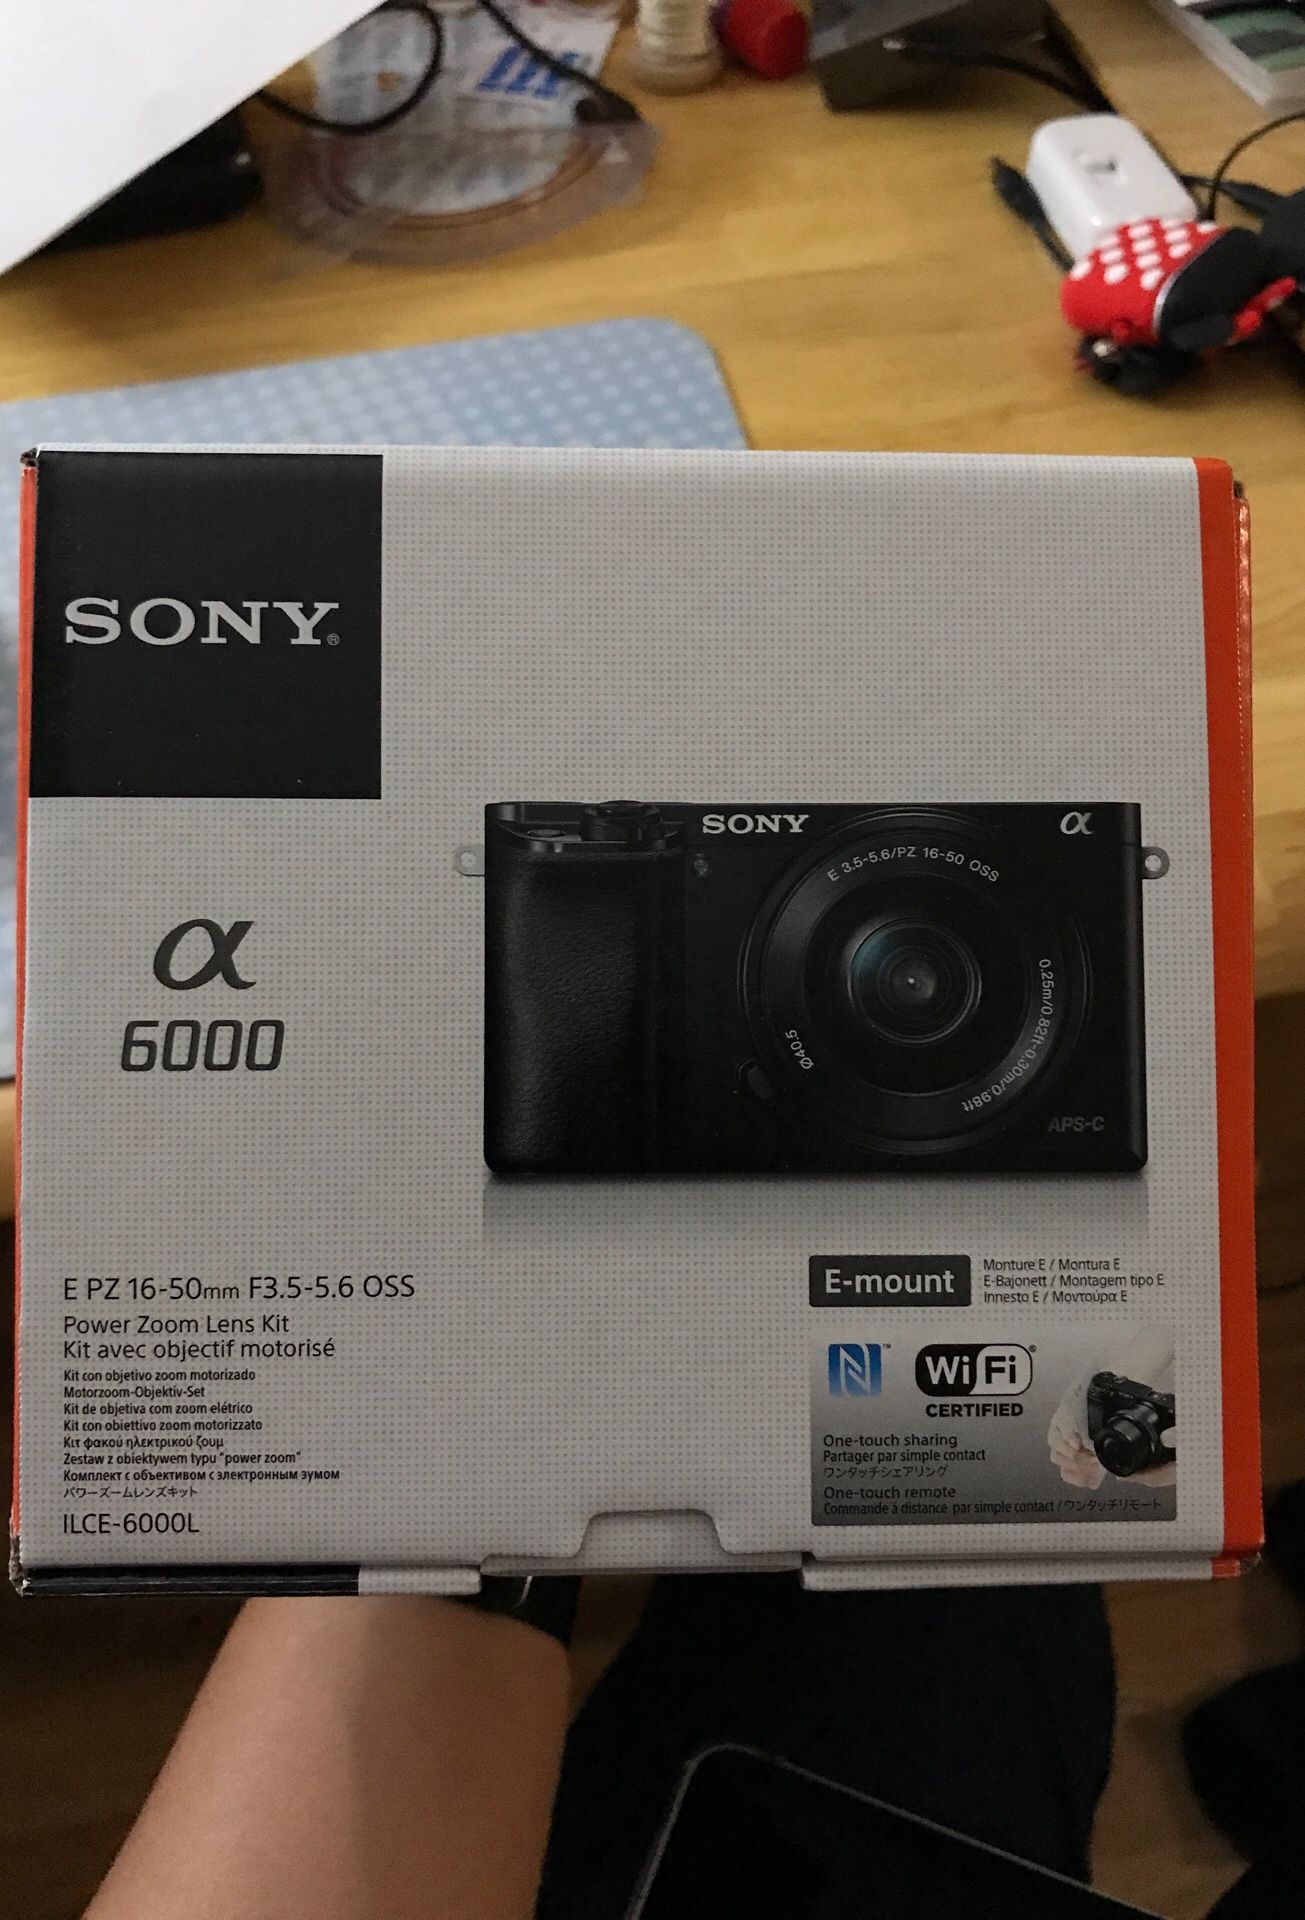 NEW - SONY Alpha A6000 SLR Camera with 16-50mm Power Zoom Lens